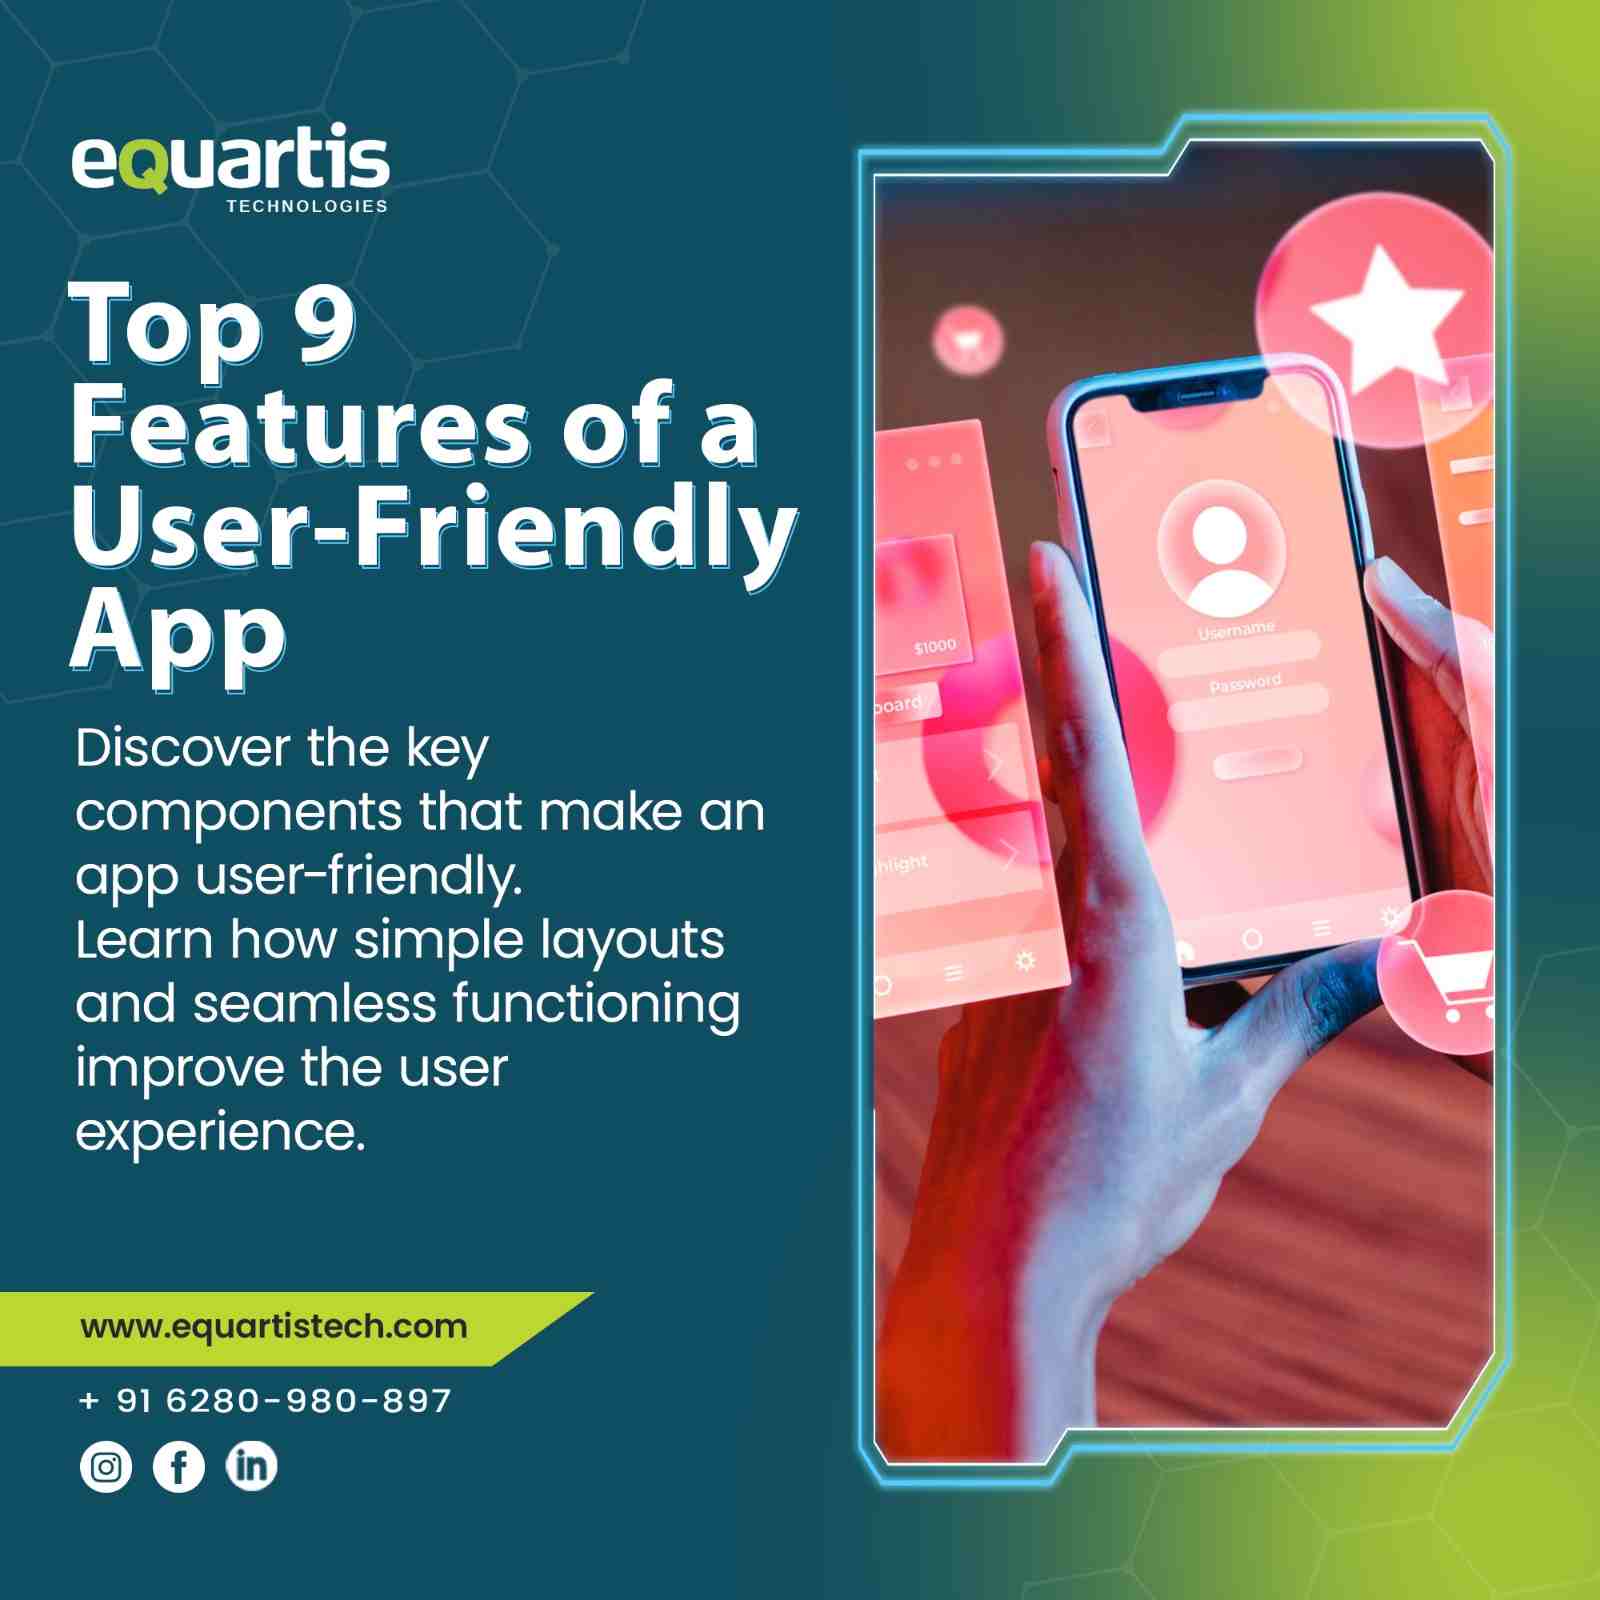 Top 9 Features of a User-Friendly App